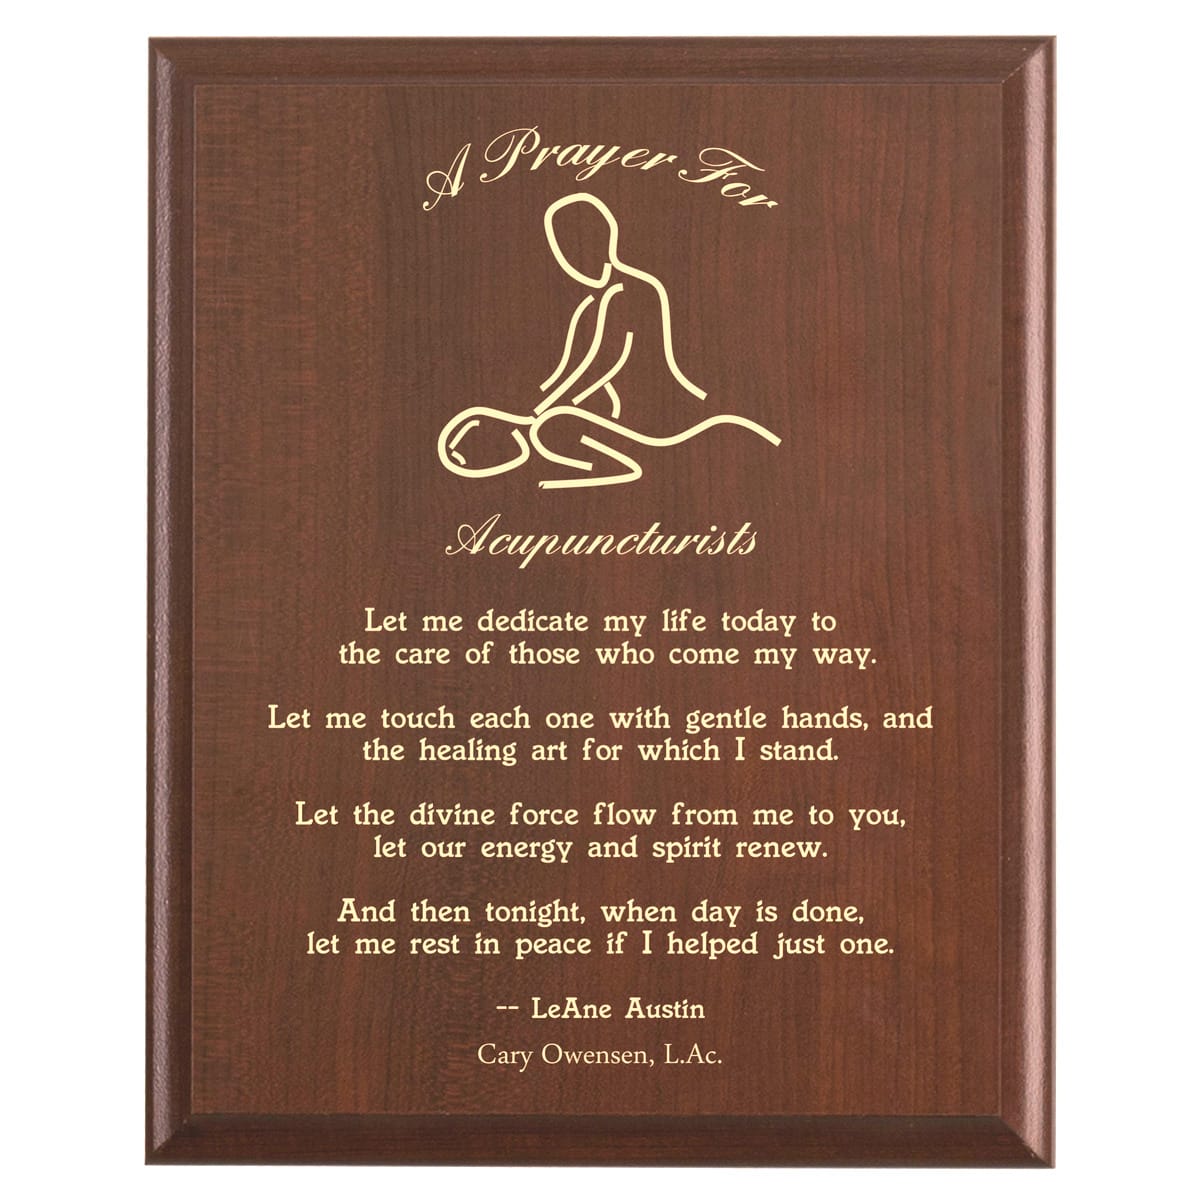 Plaque photo: Acupuncturist Prayer Plaque design with free personalization. Wood style finish with customized text.